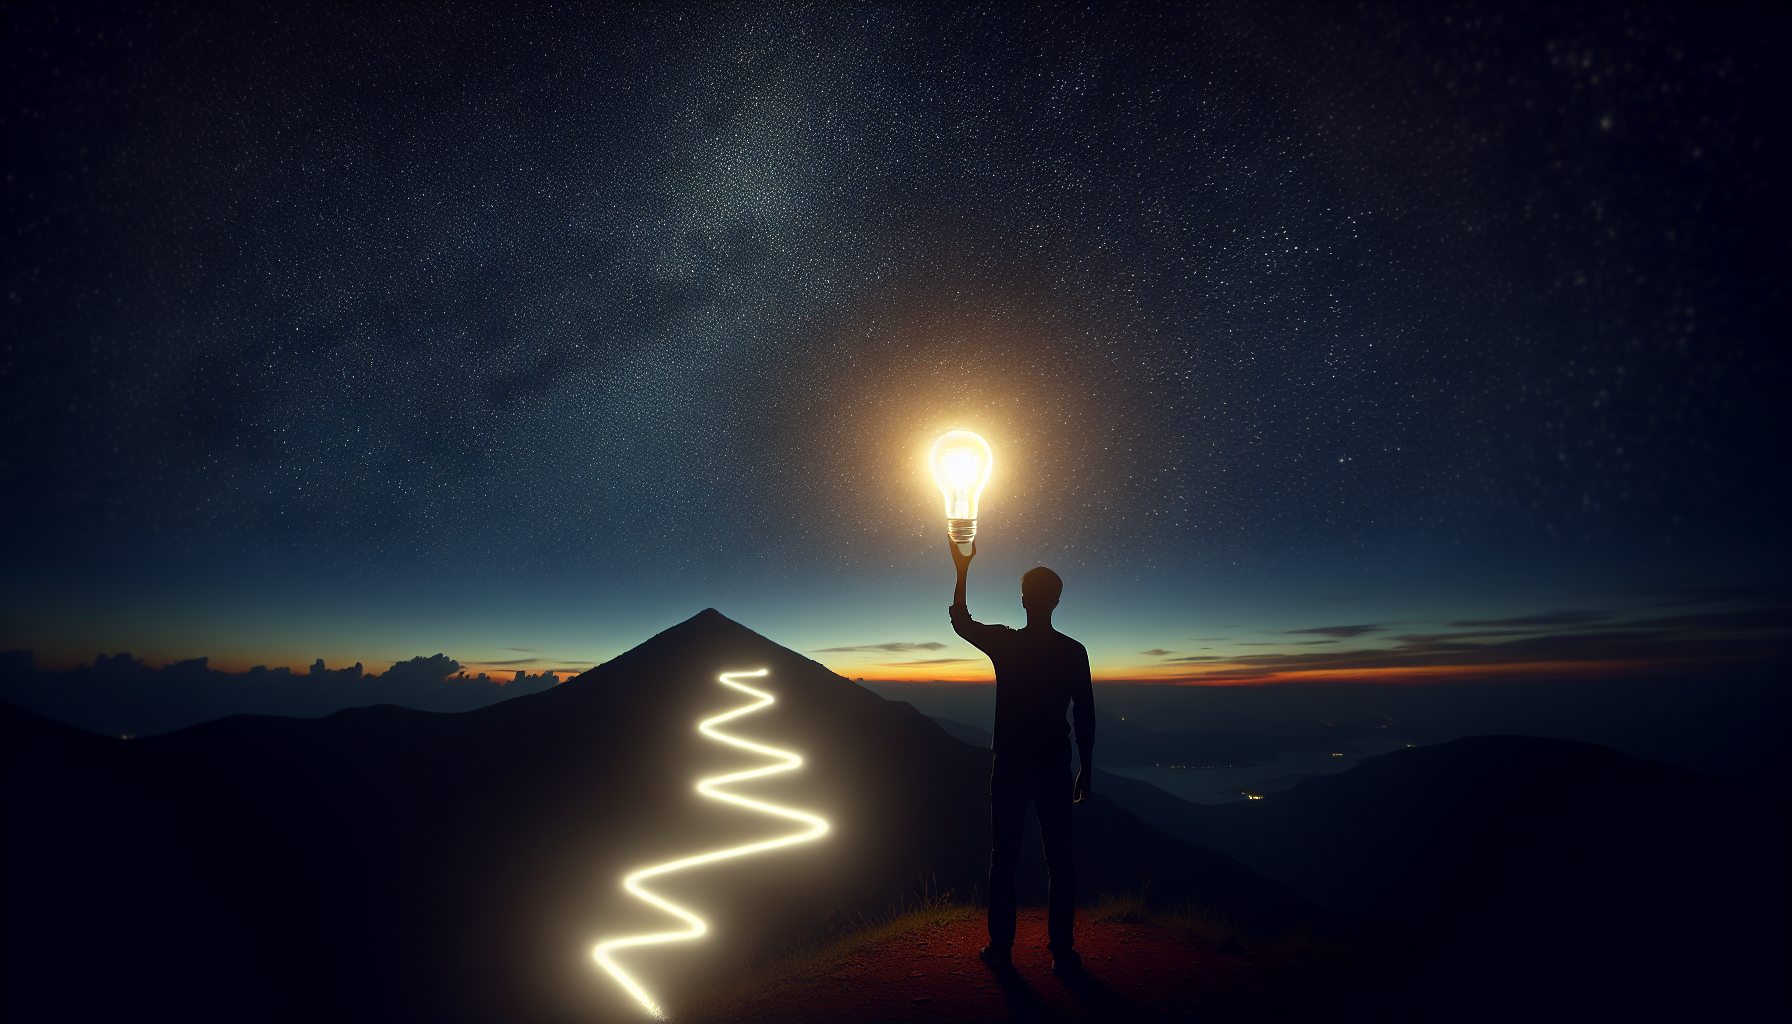 A man looking at a hill in the night sky. He is holding a light bubl, while a path of light illuminates the way to the top of the hill.